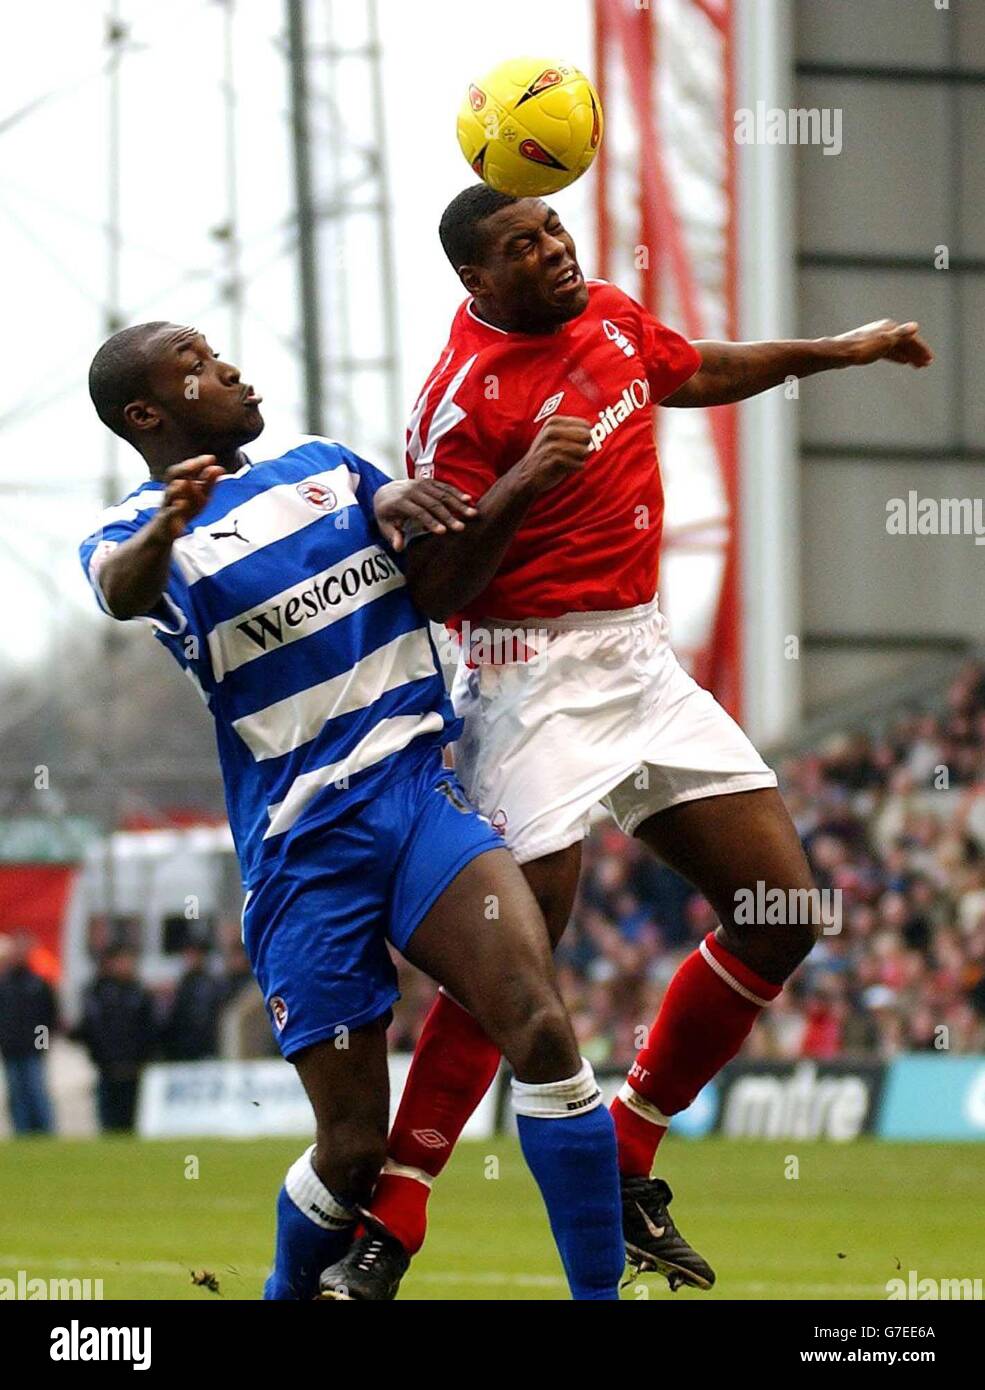 Nottingham Forest's Wes Morgan (right) wins the header against Reading's Lloyd Owusu during the Coca-Cola Championship match at The City Ground, Nottingham, Saturday November 20, 2004. NO UNOFFICIAL CLUB WEBSITE USE. Stock Photo